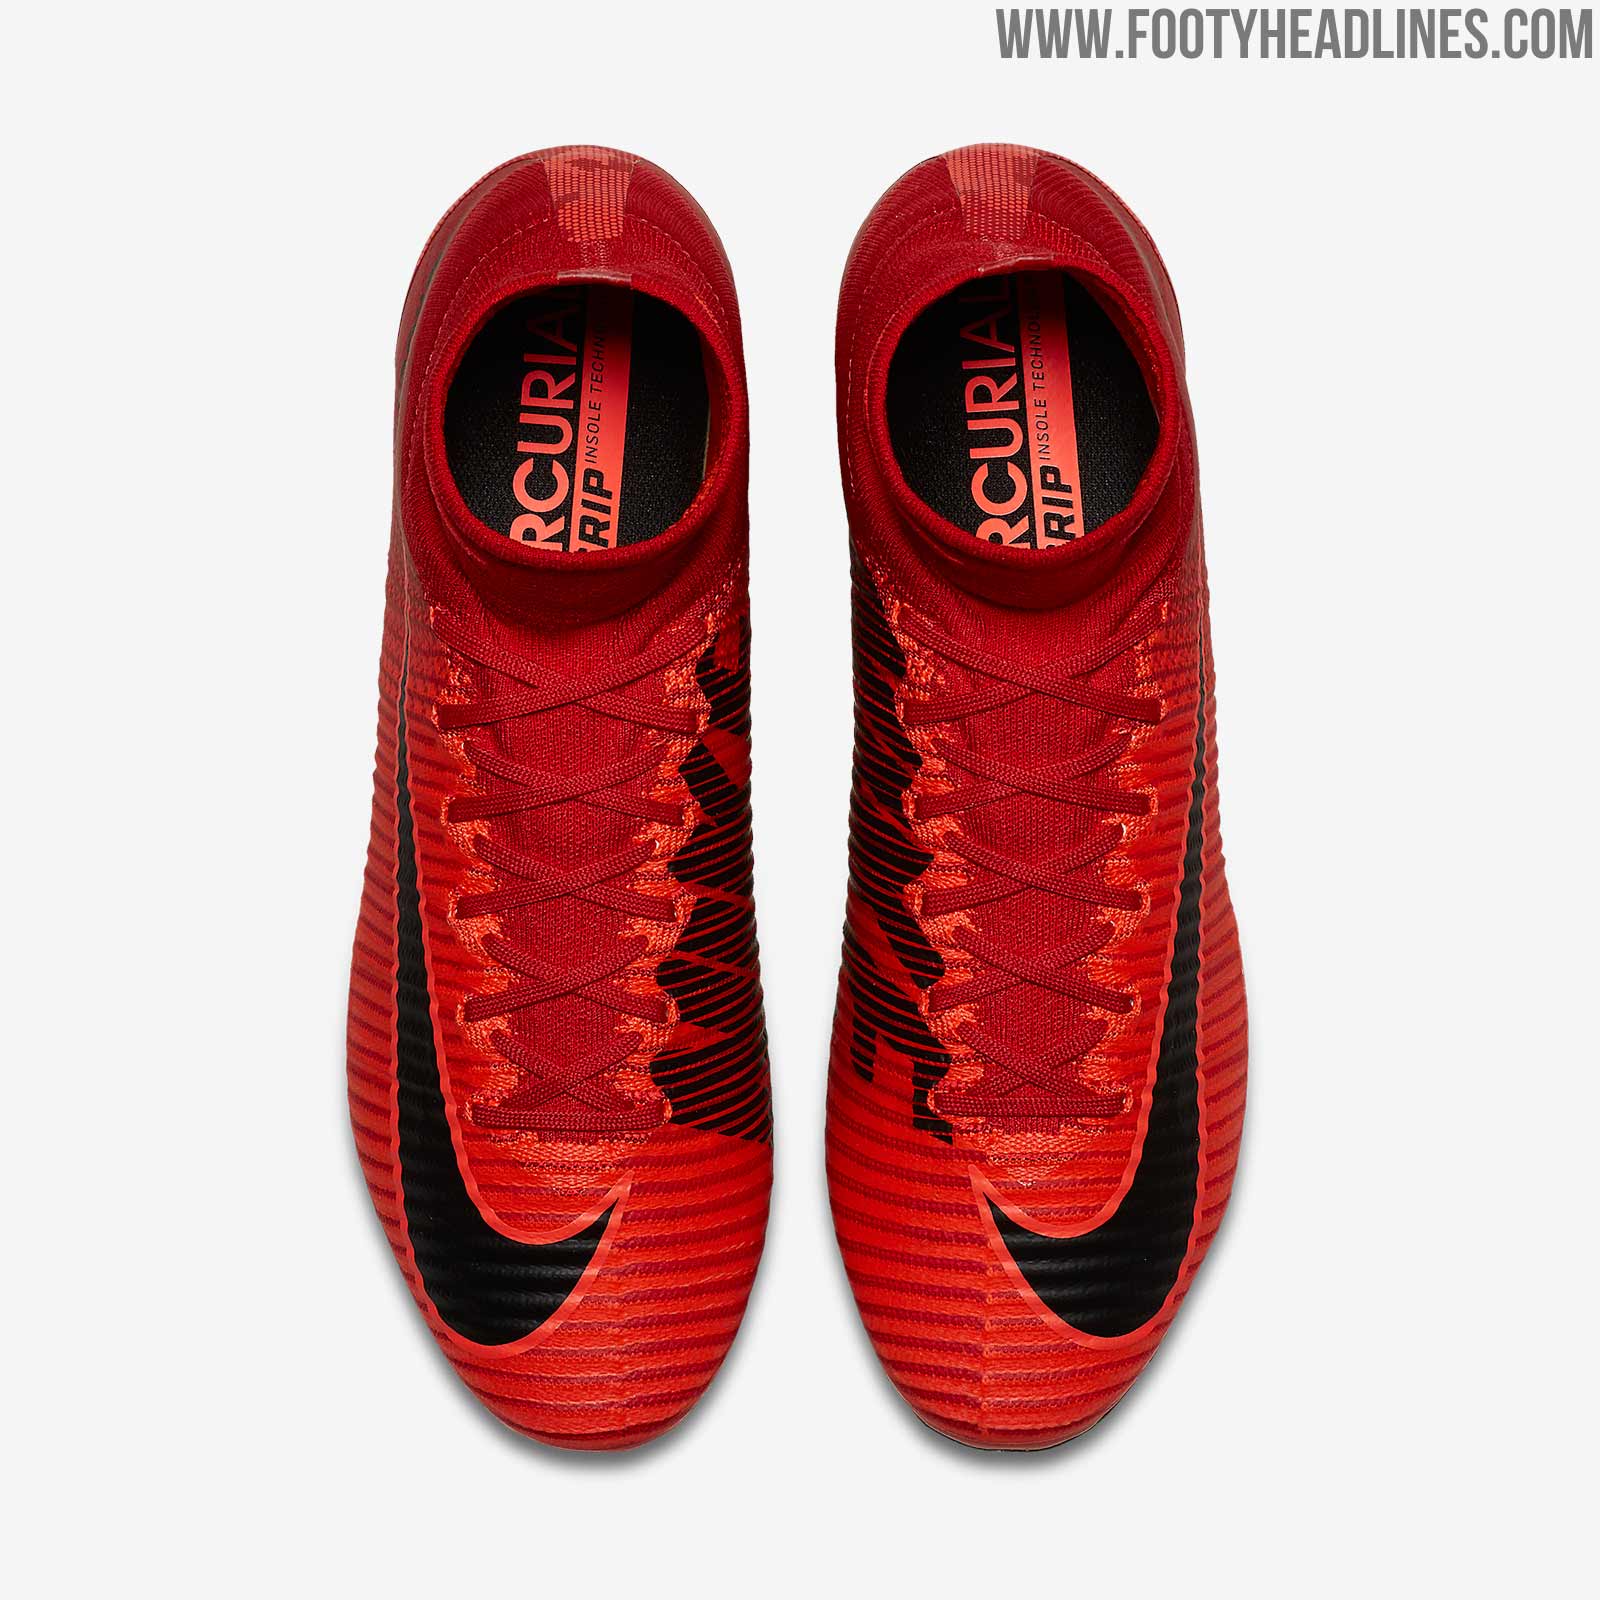 Nike Superfly V Pack Boots Revealed - Footy